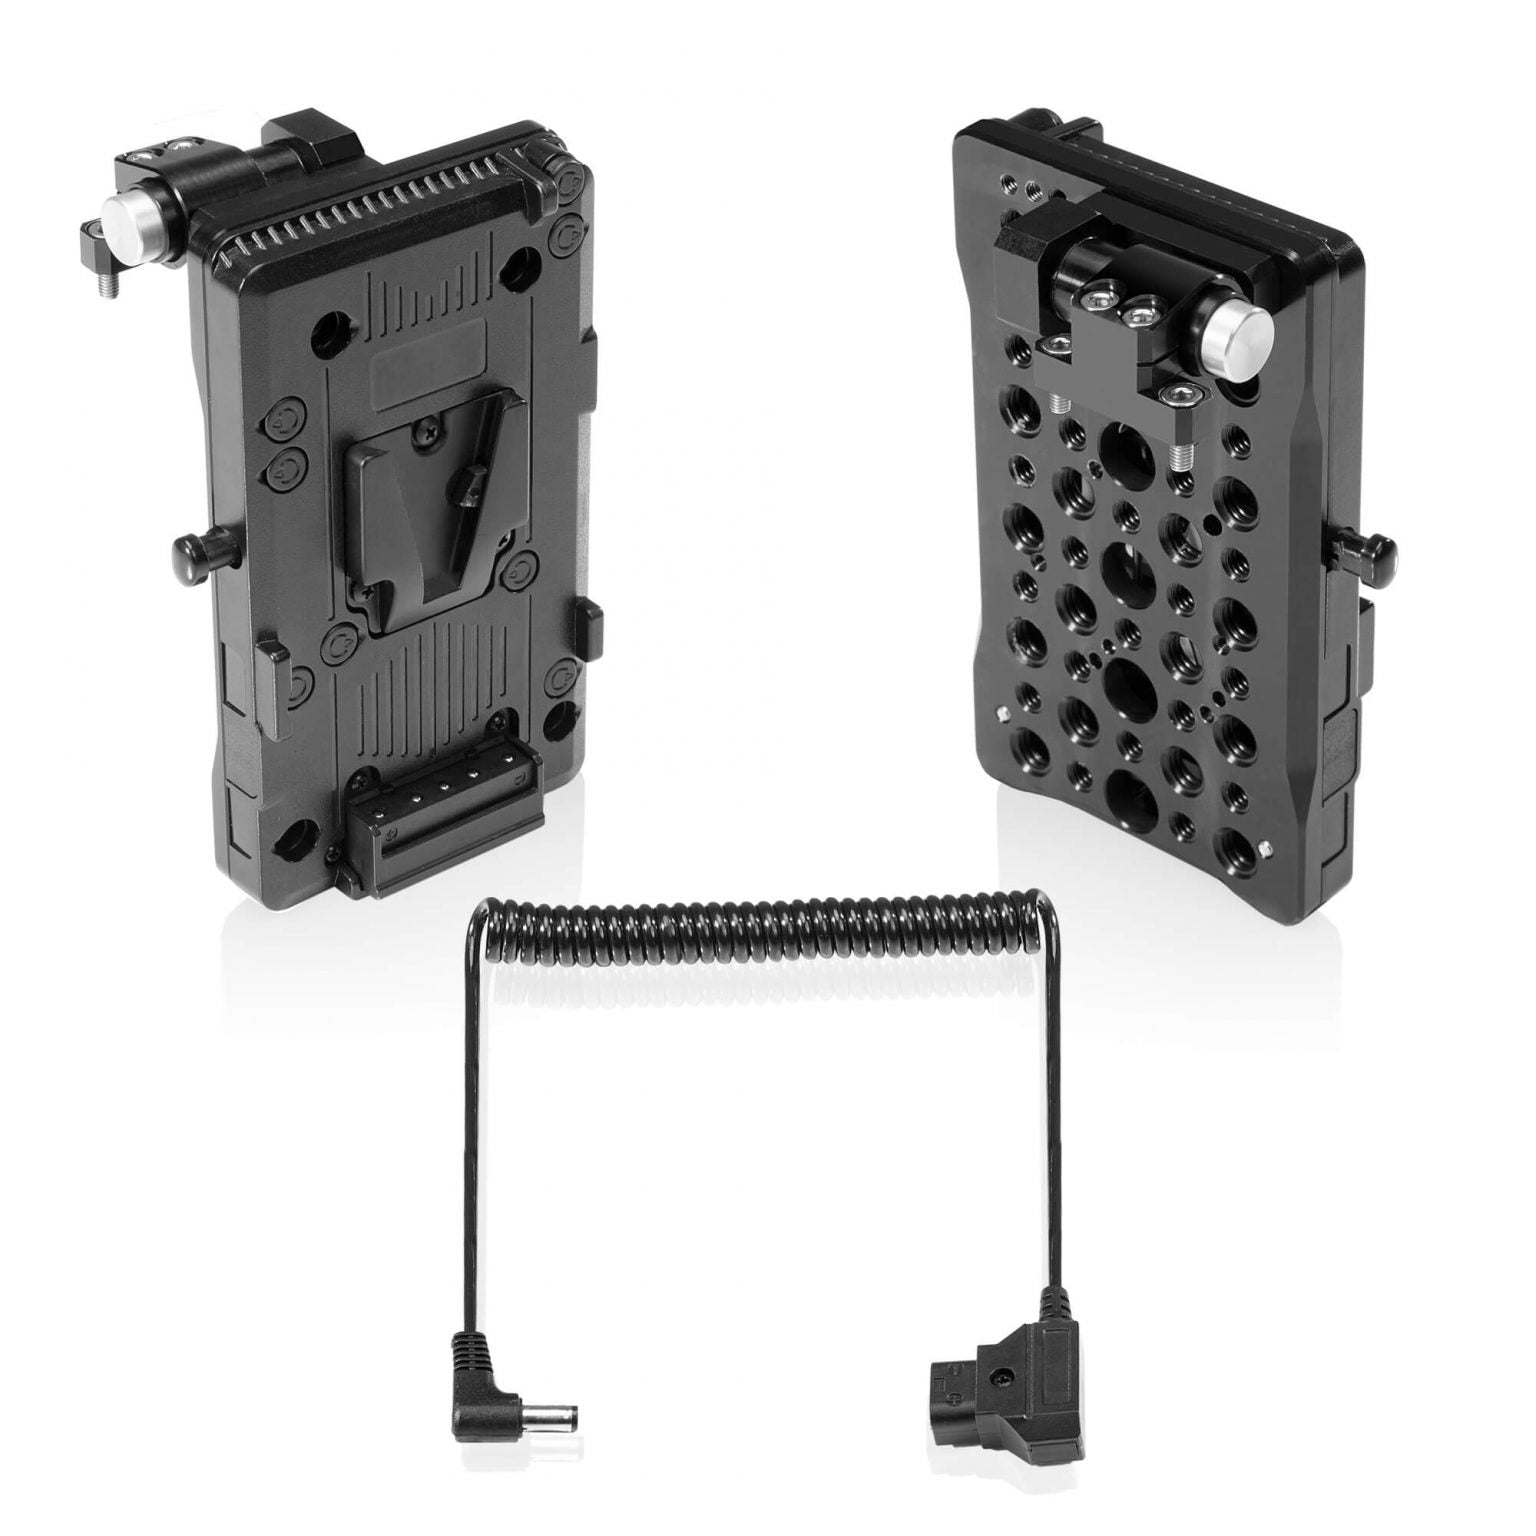 SHAPE Pivoting Battery Plate for Canon C70 - SHAPE wlb